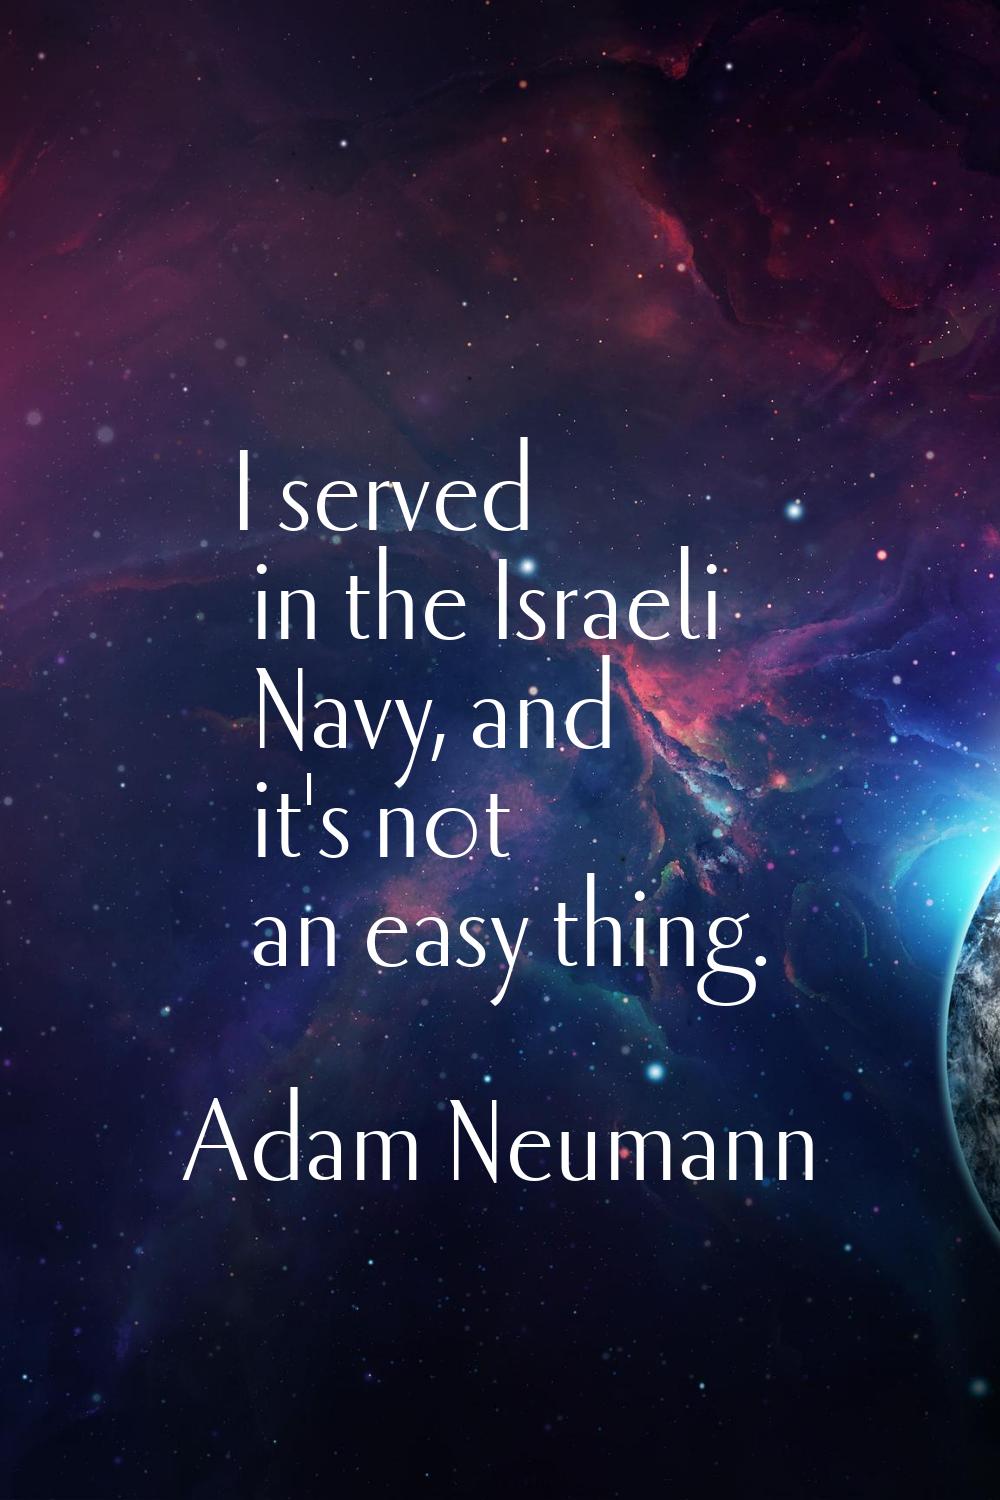 I served in the Israeli Navy, and it's not an easy thing.